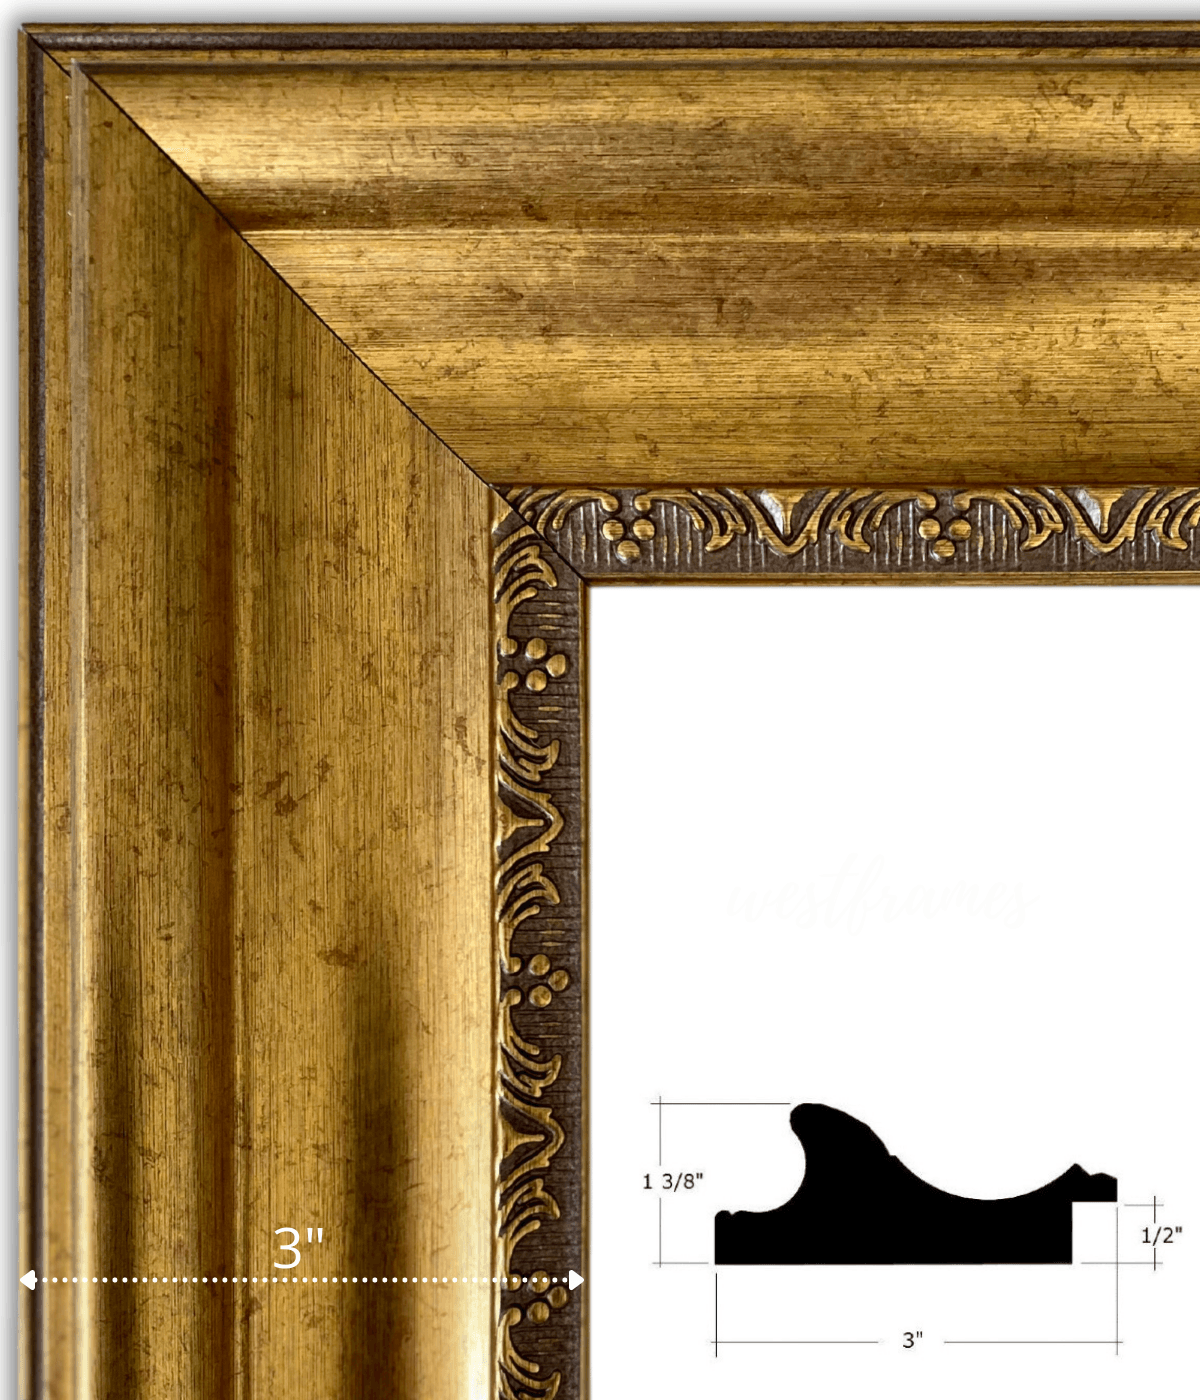  20x20 Frame Black and Gold Ornate Fitz Solid Wood